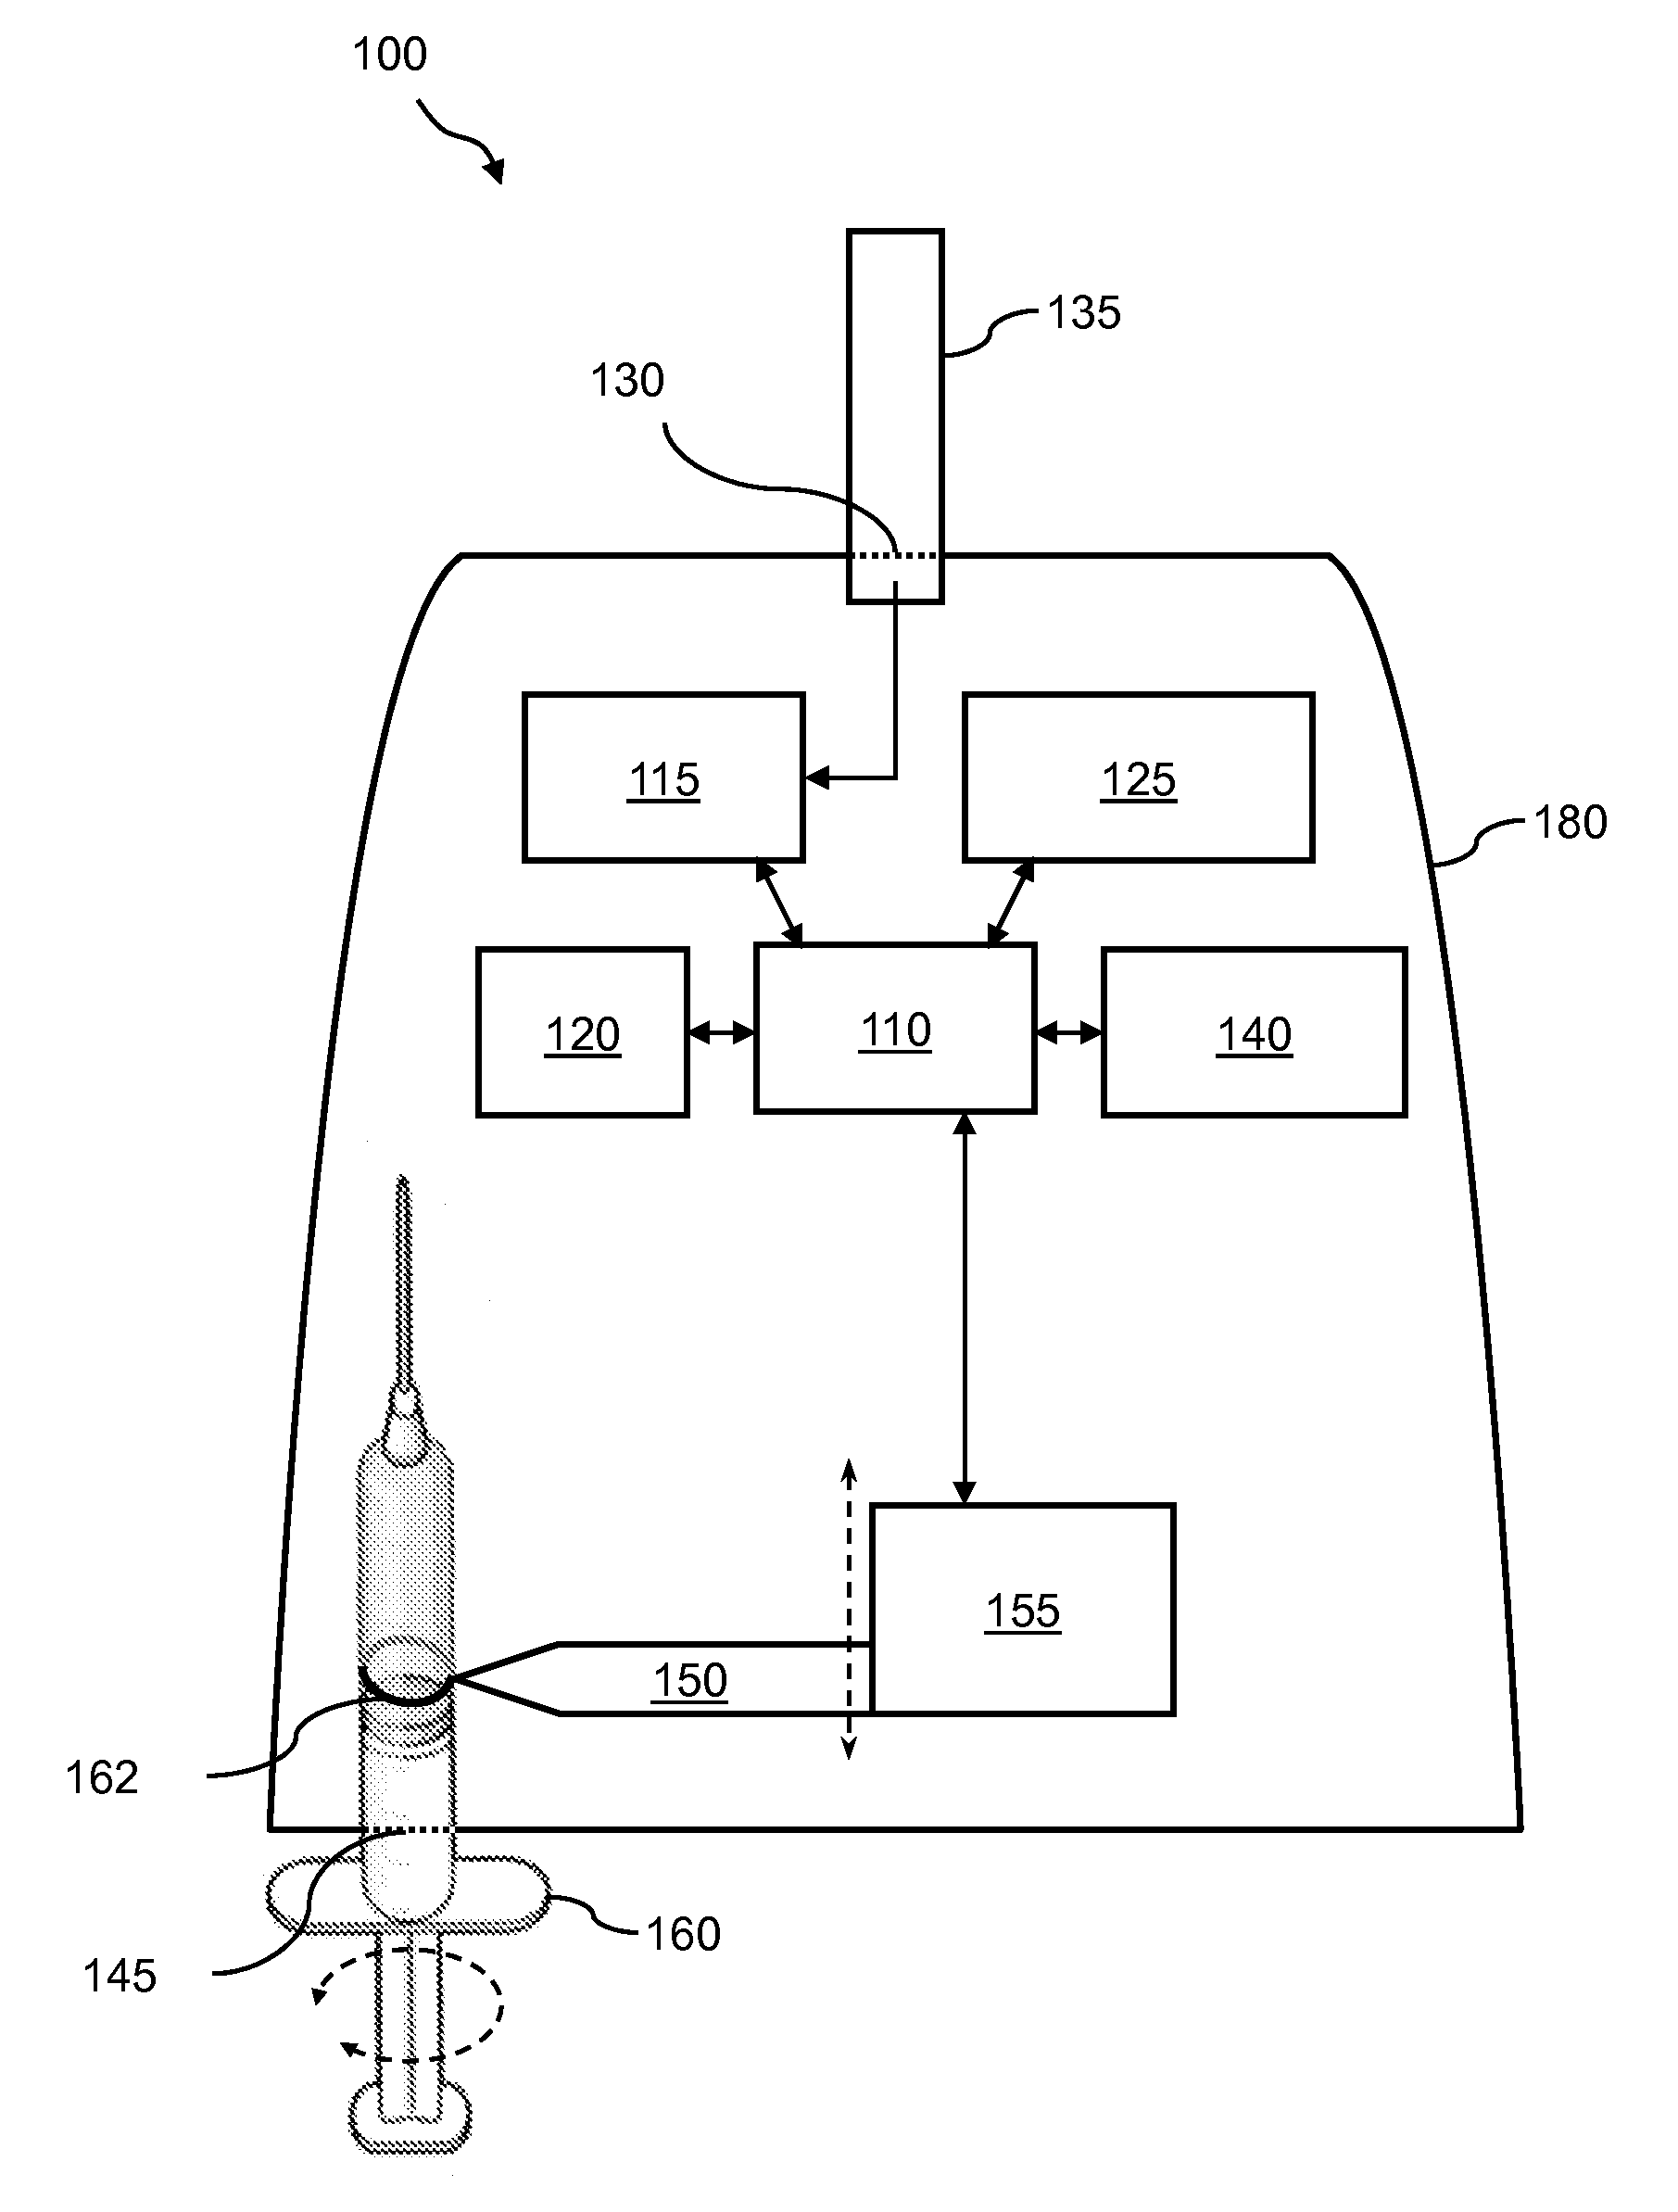 Multifunctional glucose monitoring system and method of using the same